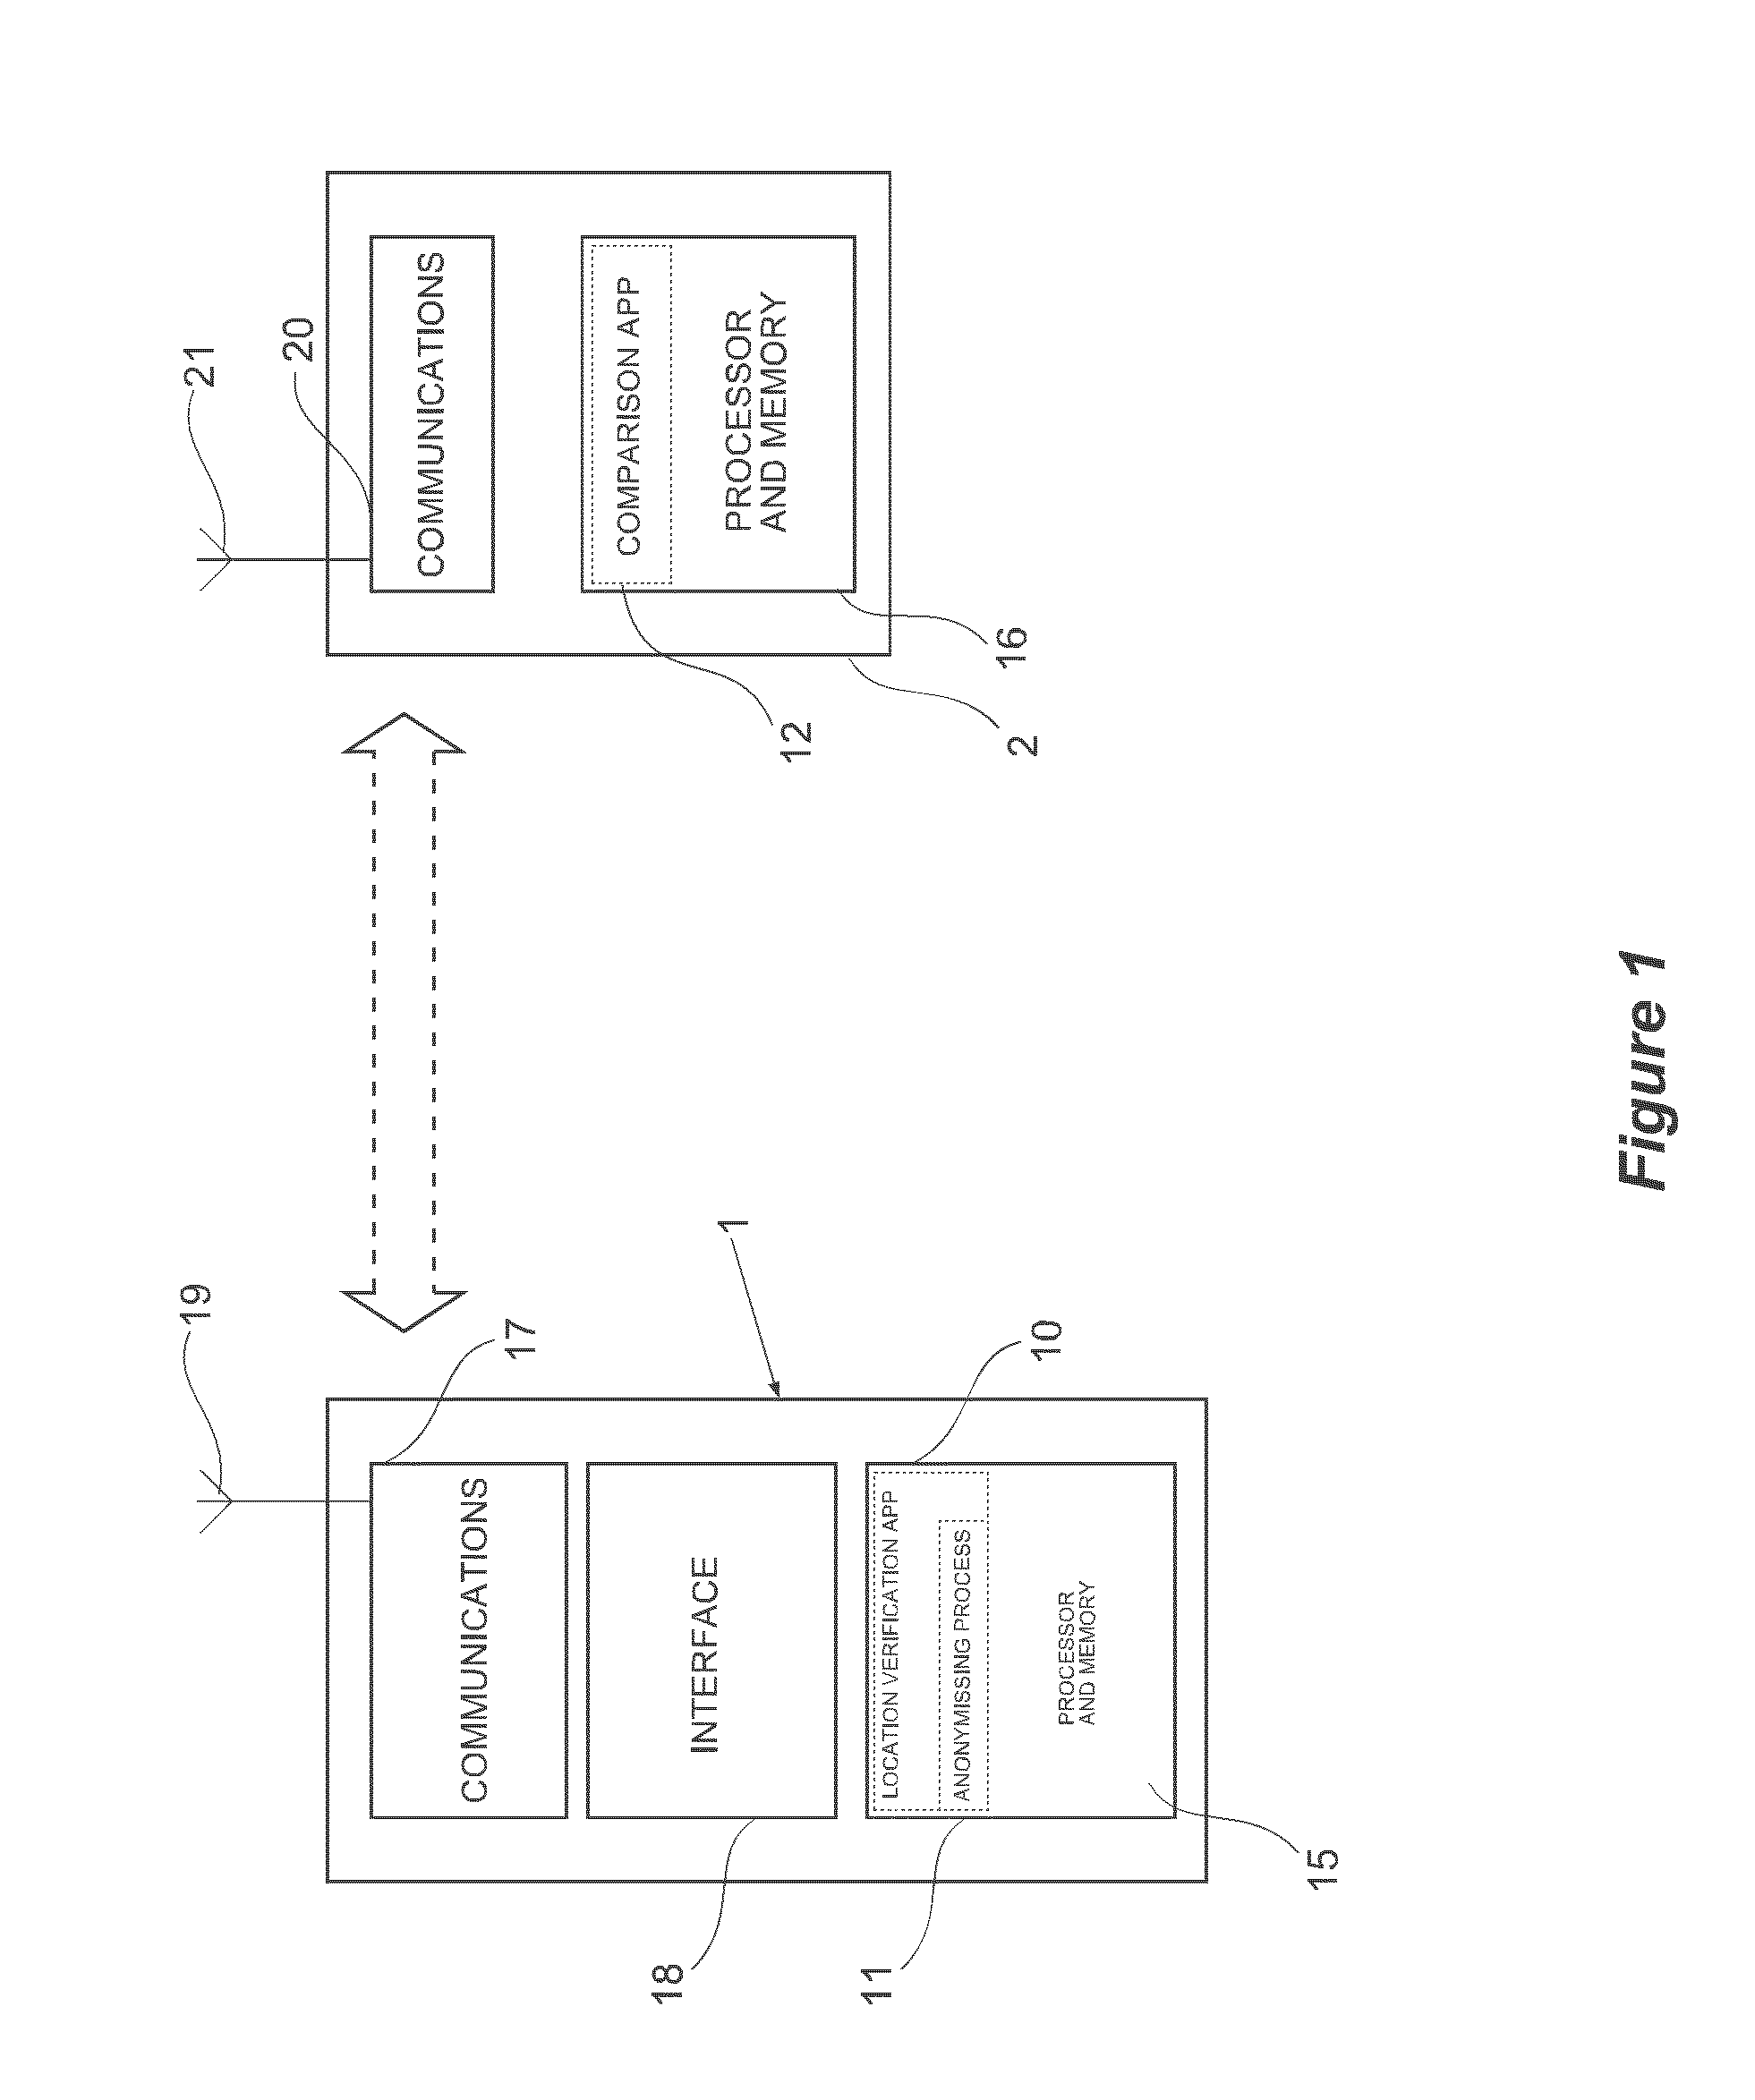 Method and apparatus for authentication utilizing location